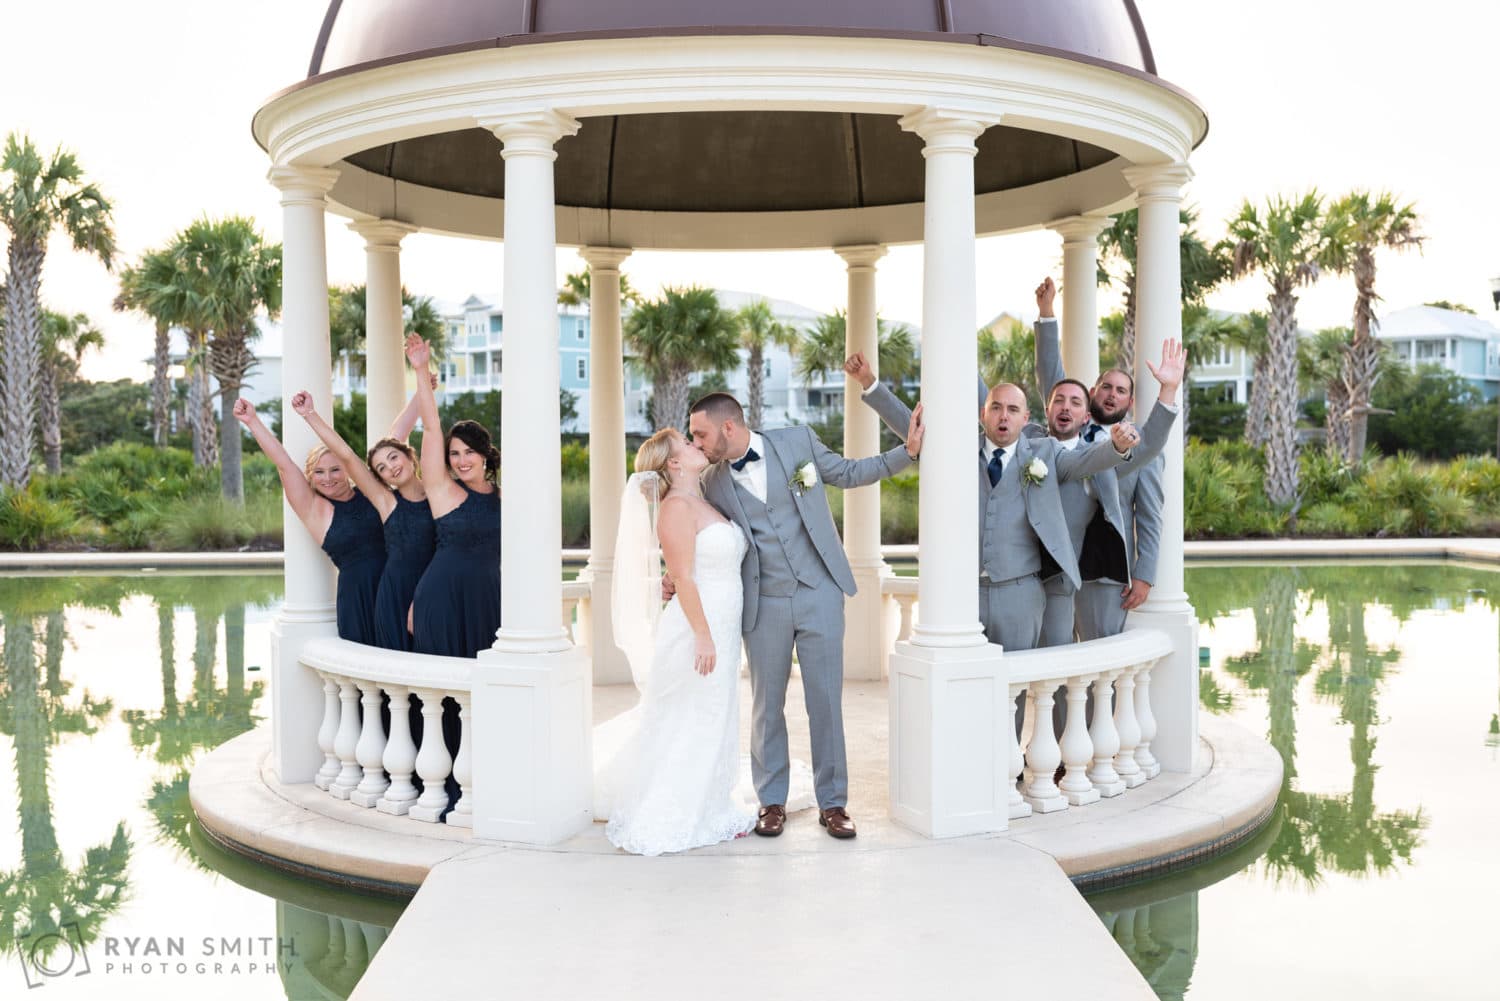 Bridal party in the gazebo   - 21 Main Events - North Myrtle Beach